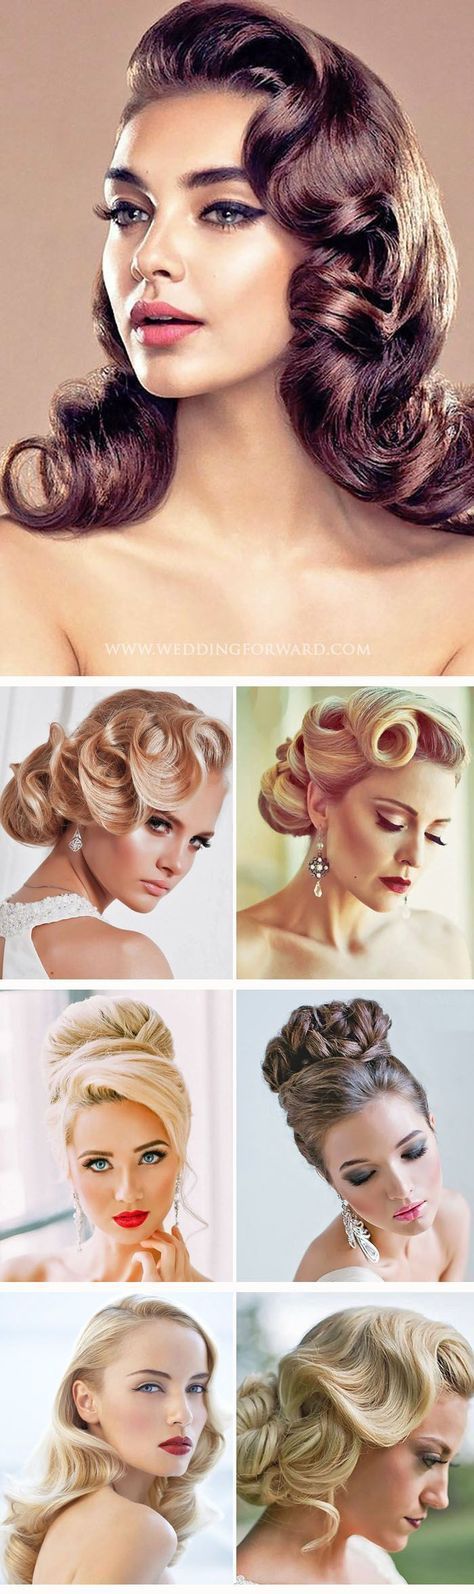 30 UTTERLY GORGEOUS VINTAGE WEDDING HAIRSTYLES